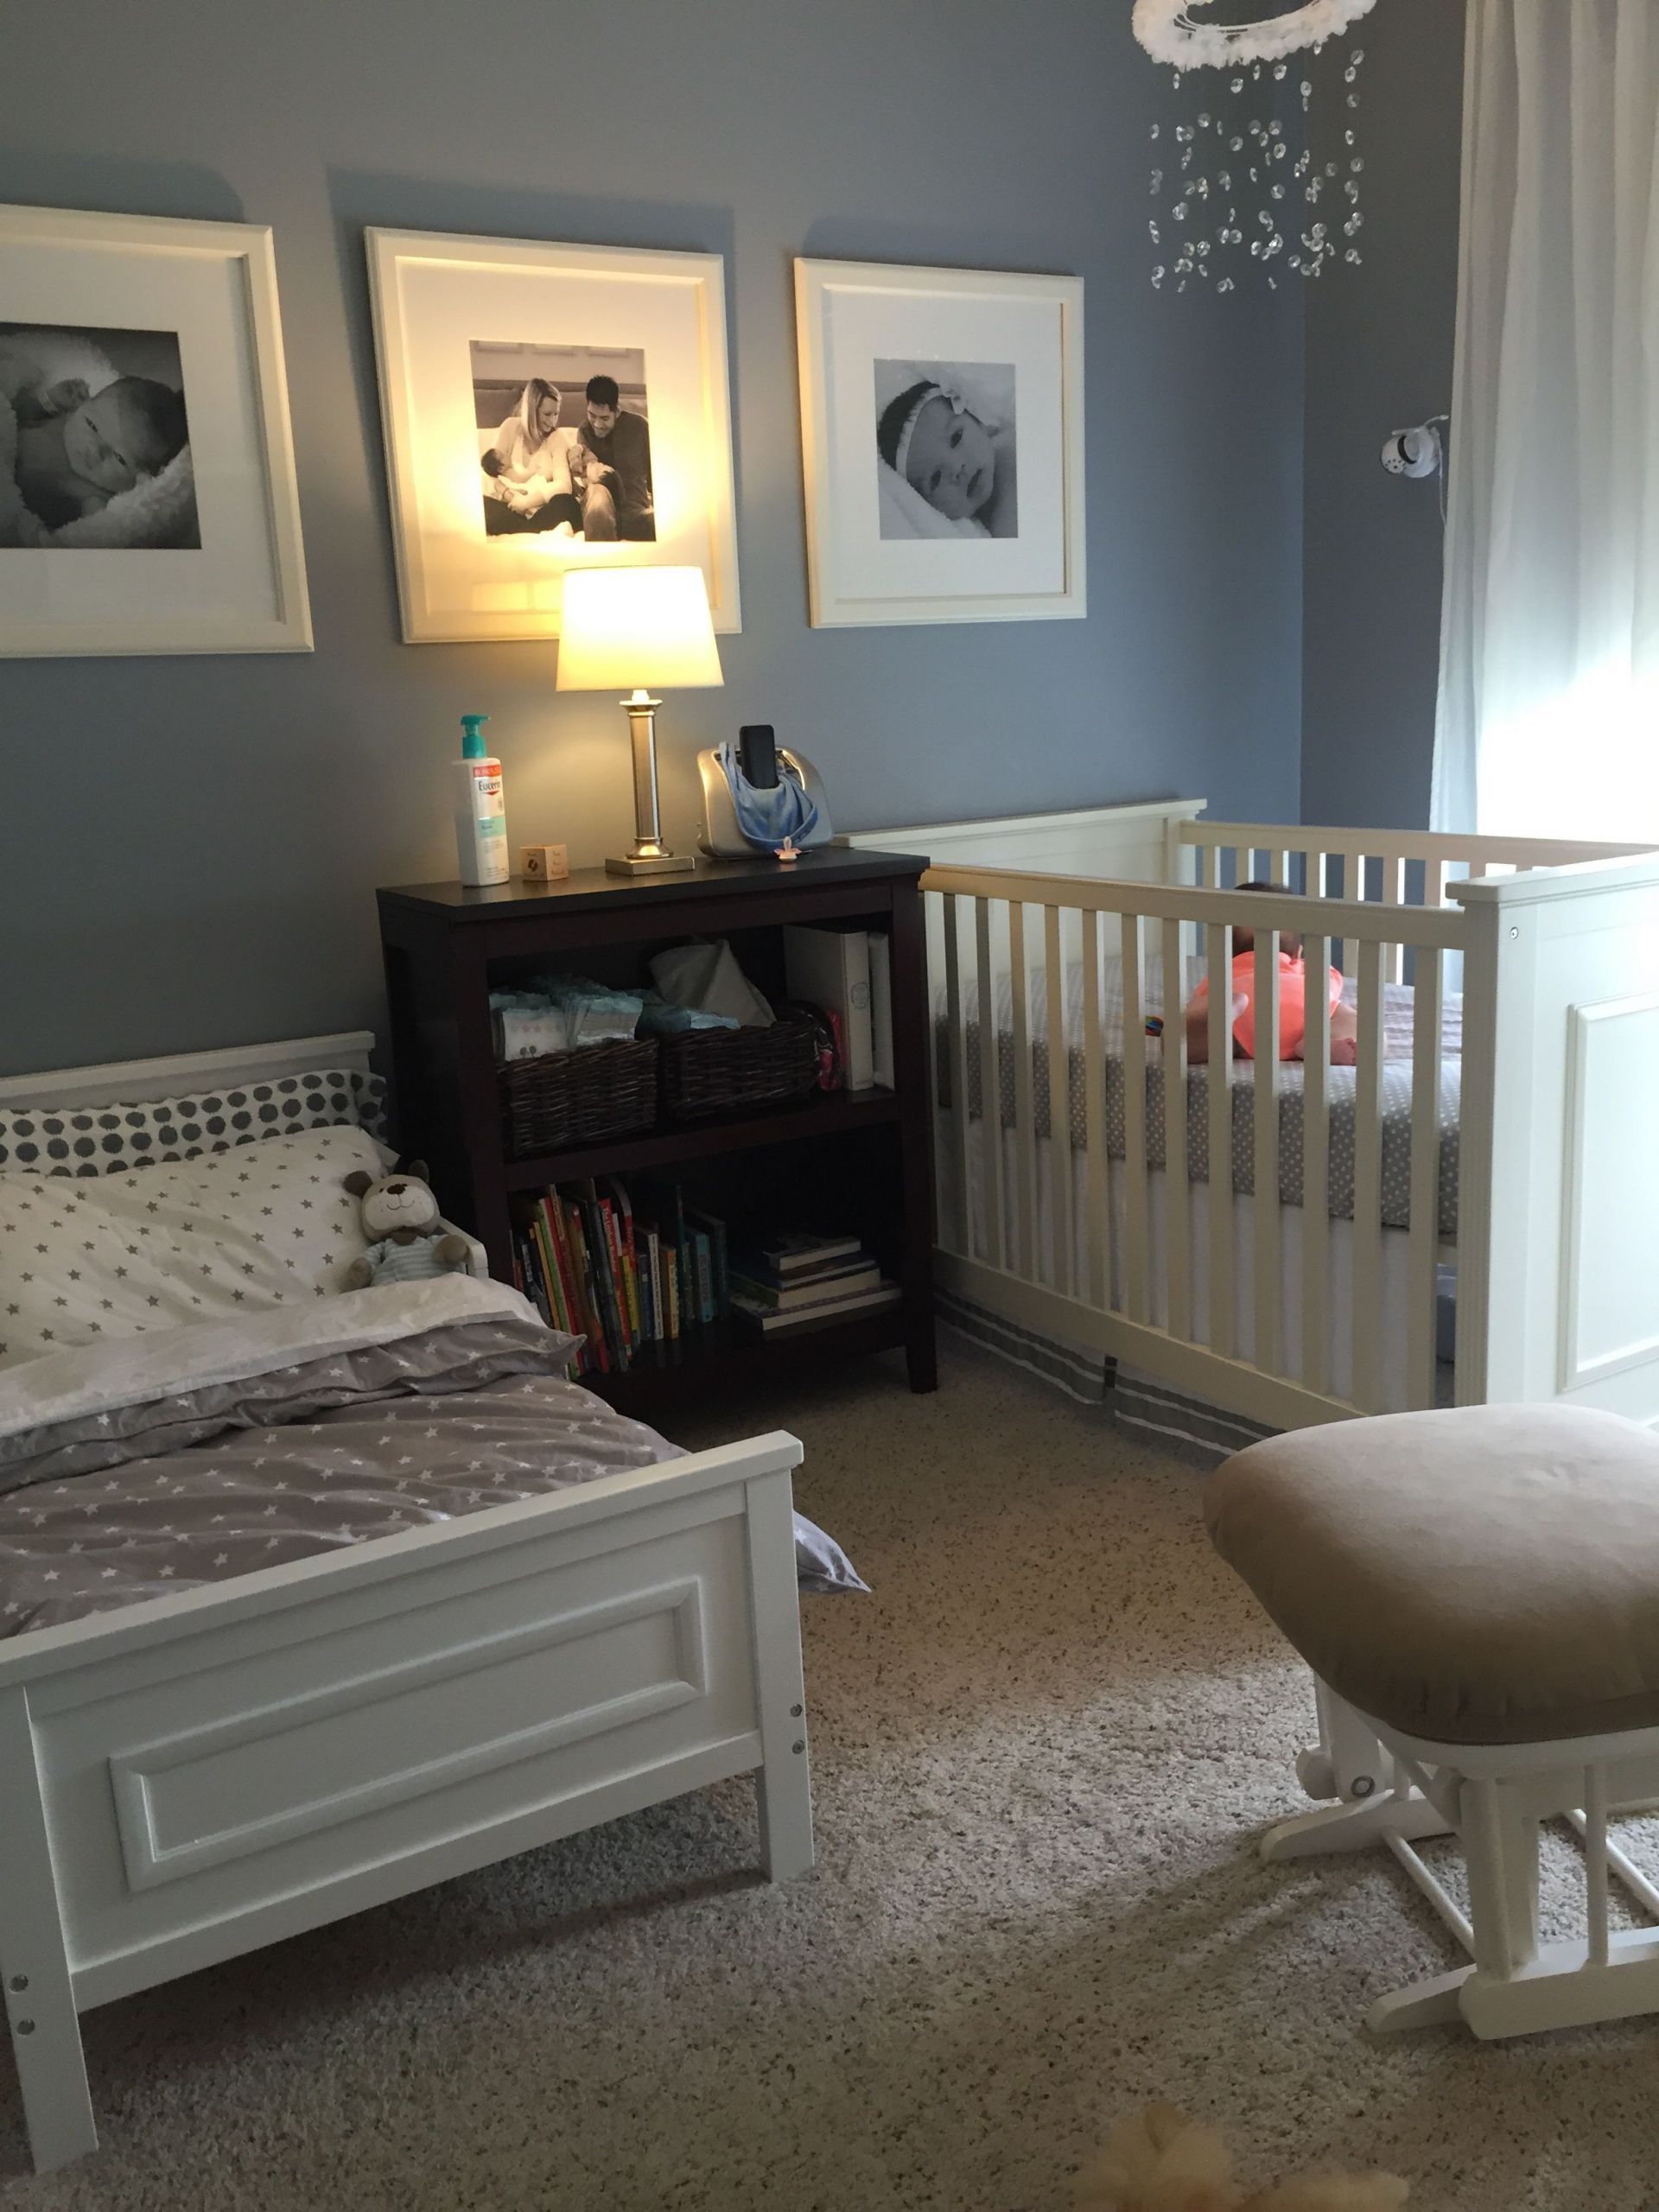 Sharing A Room With Baby Decorating Ideas
 Neutral room for toddler boy and baby girl